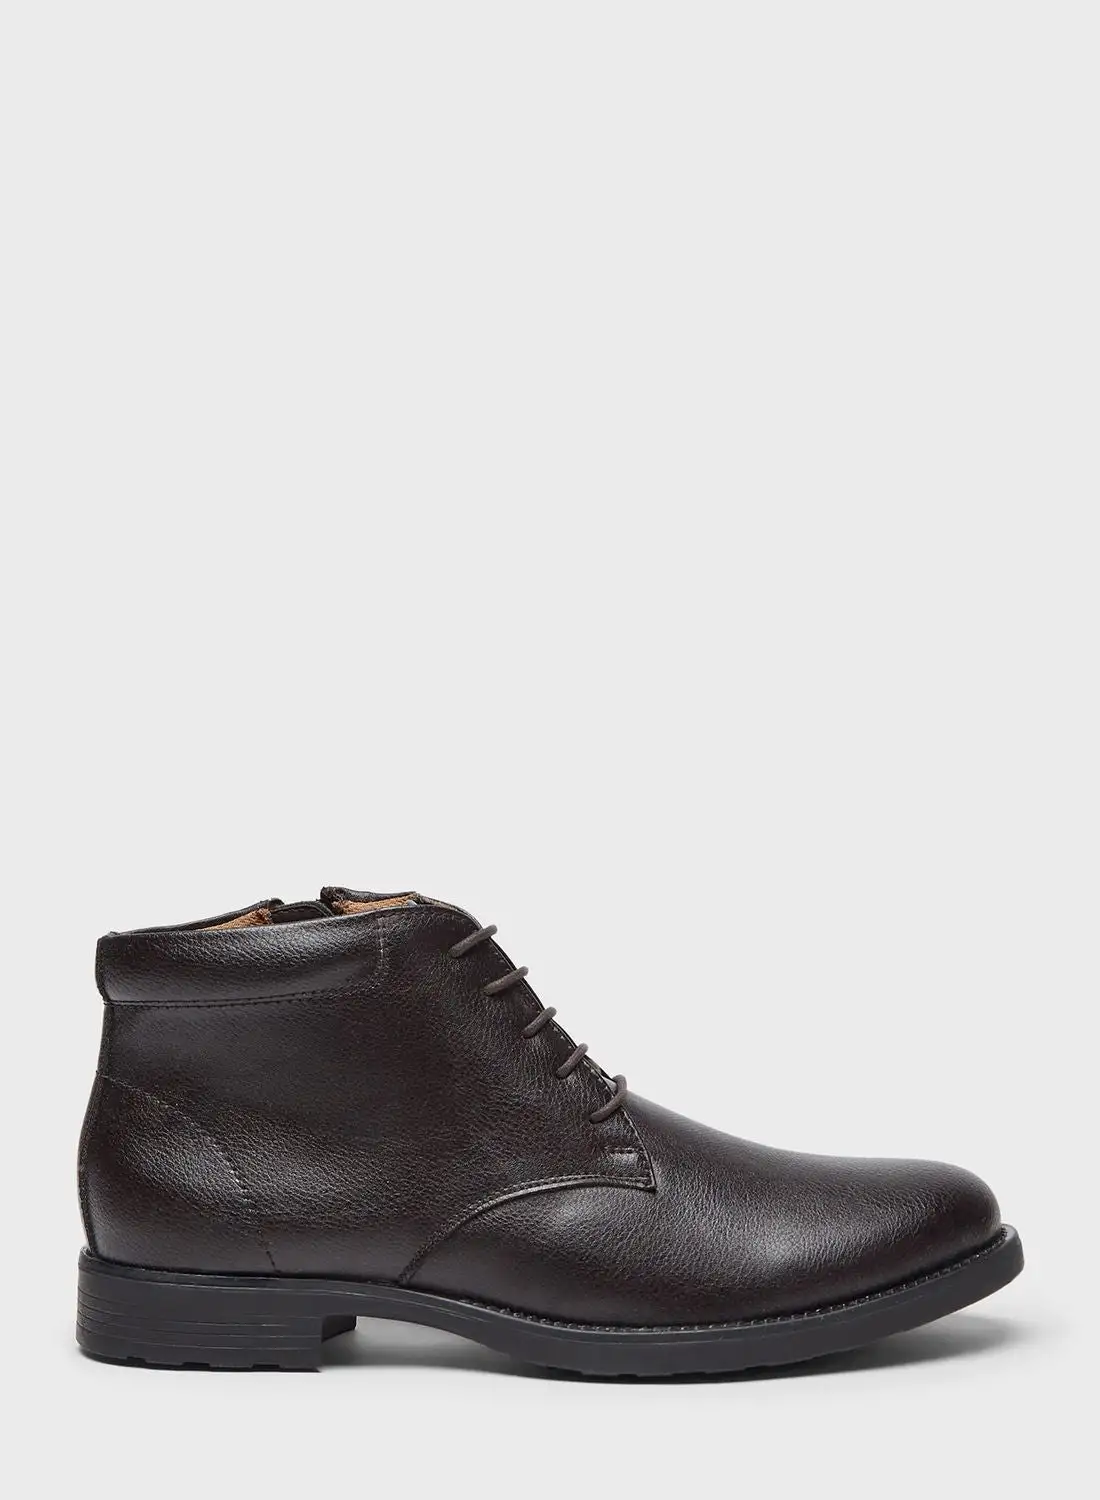 LBL by Shoexpress Formal Lace Up Boot